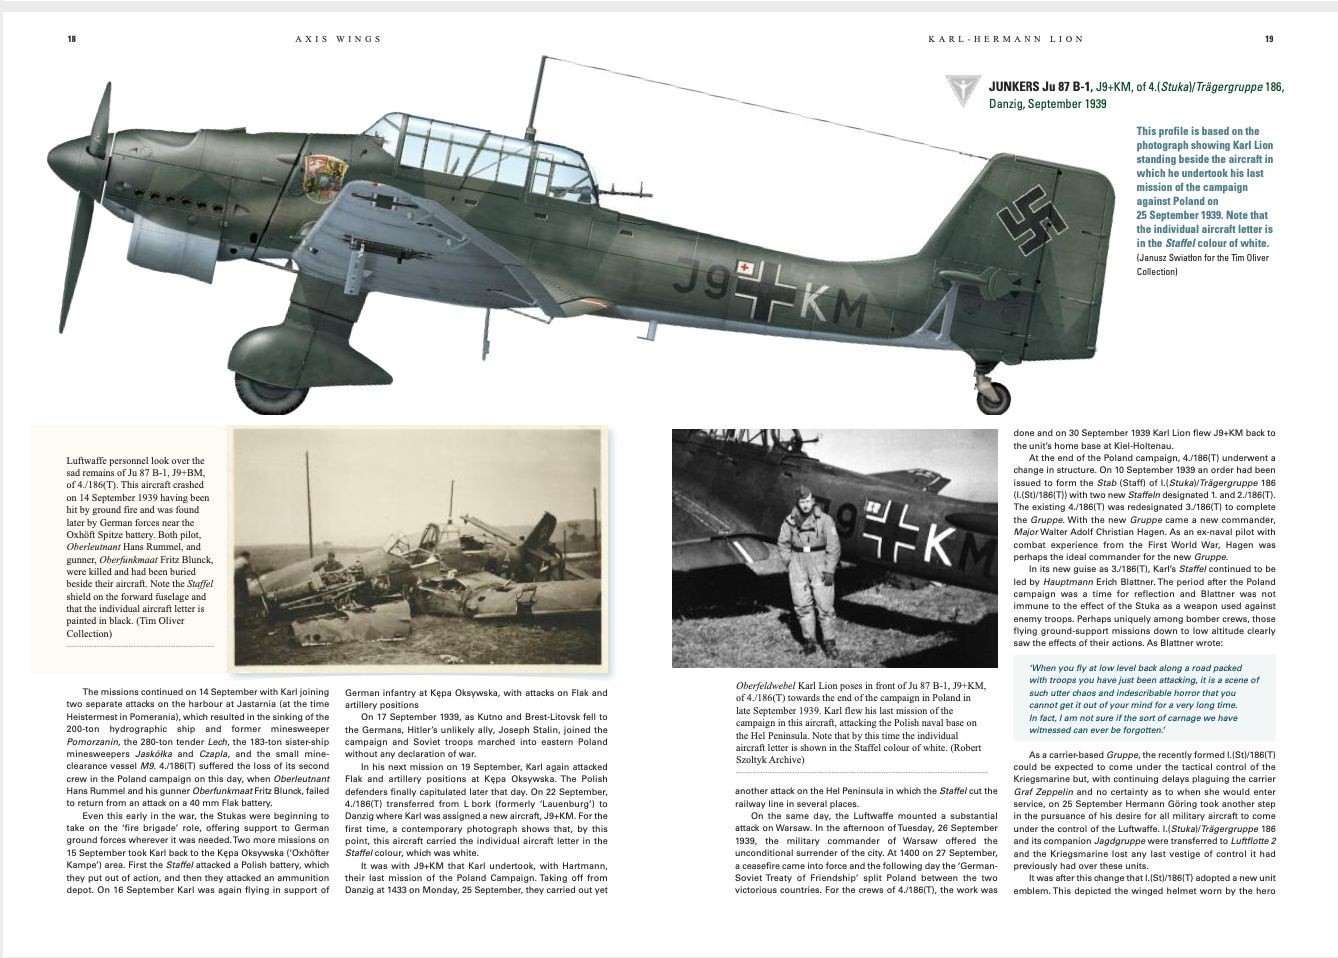 'Axis Wings' Luftwaffe and Co-Belligerent Air Forces Page 18-19 Junkers Ju 87 B-1